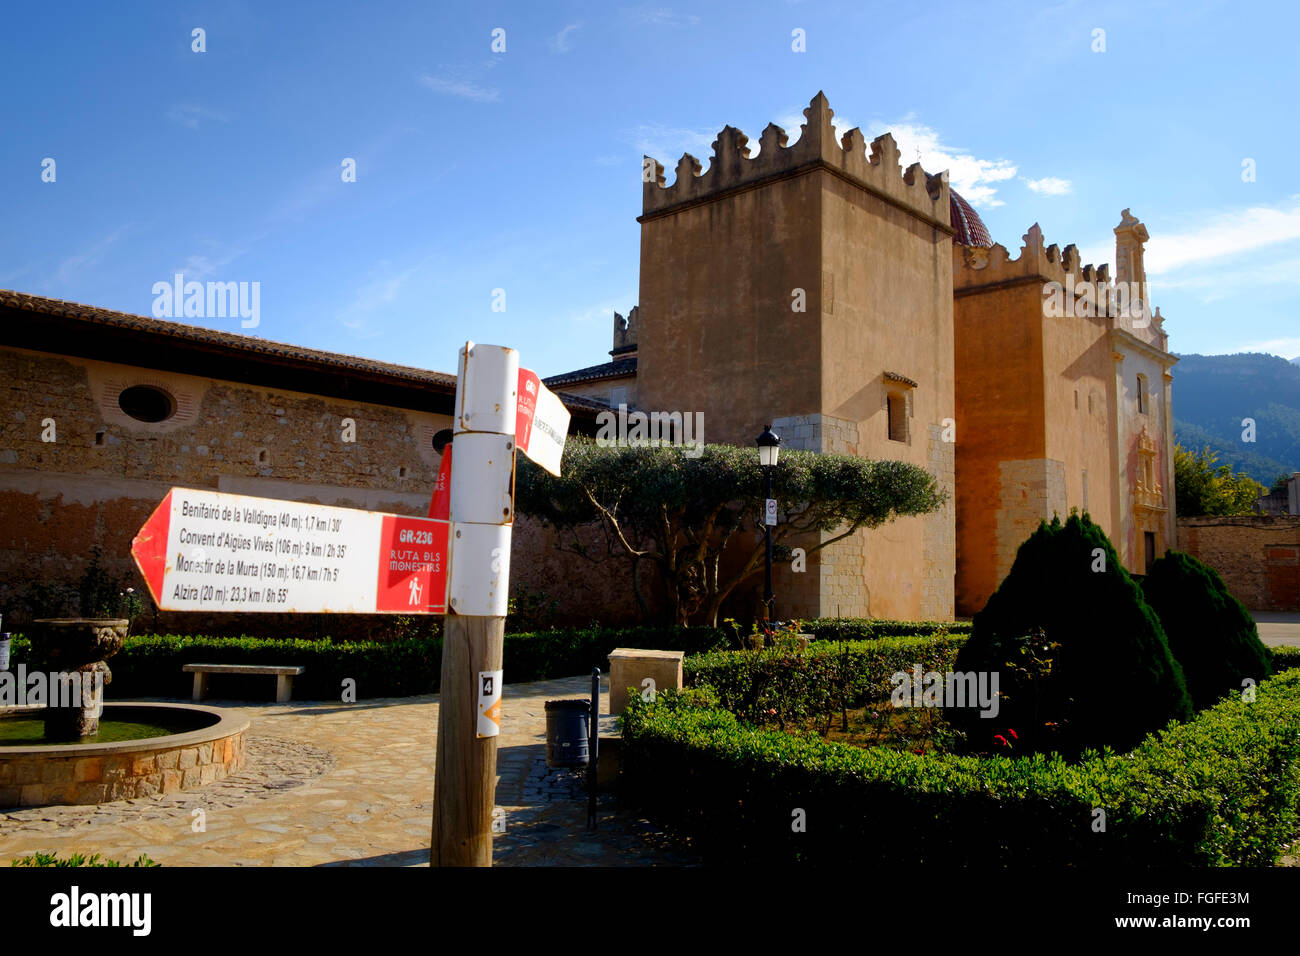 Signpost of the 'Ruta dls Monestirs'  outside the monestry at Simat Spain Stock Photo